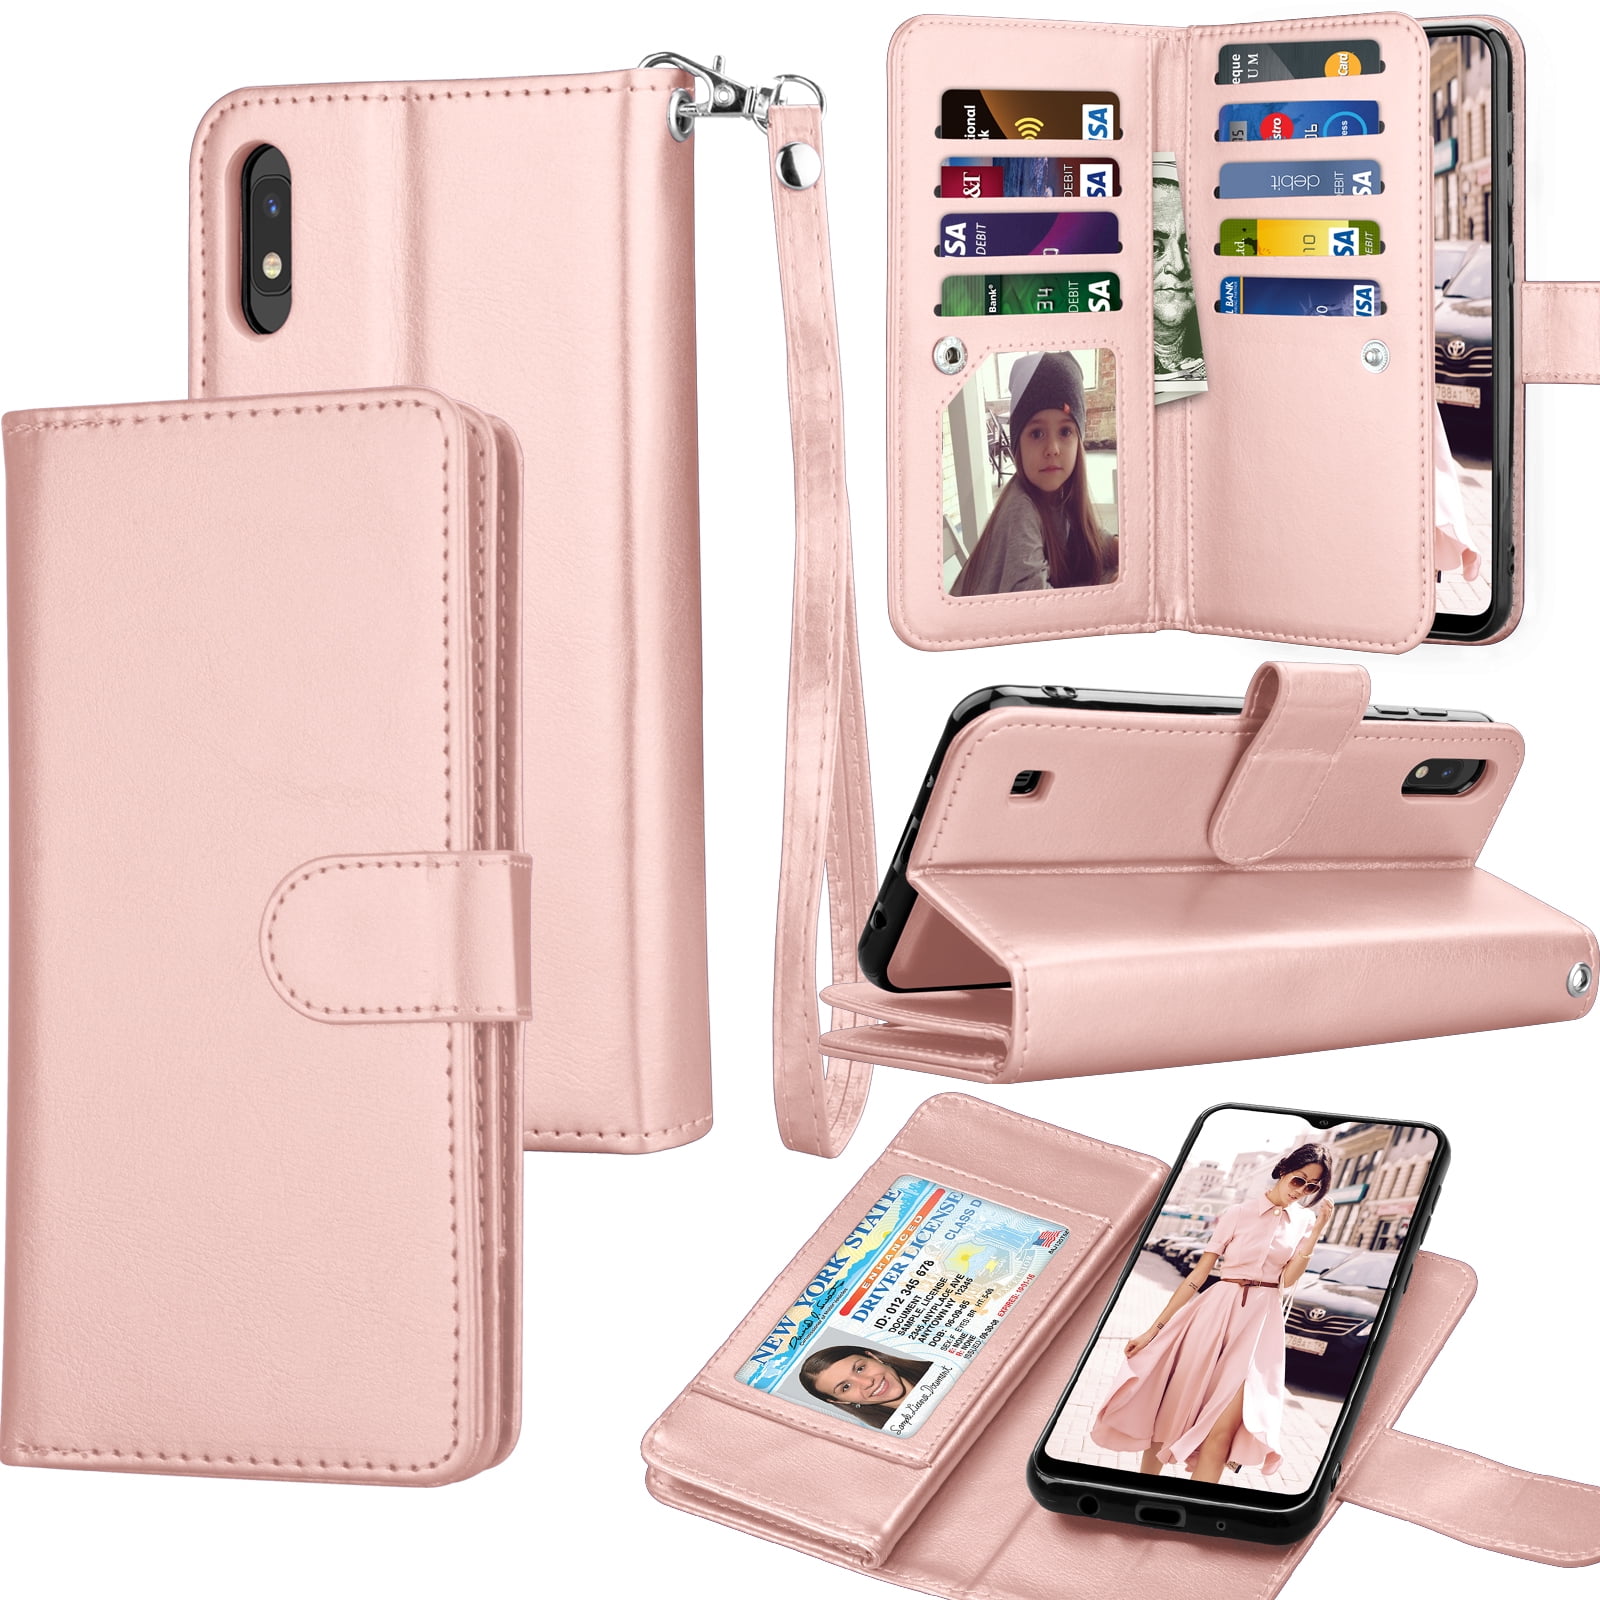 HMTECH Galaxy A10 Case Samsung Galaxy A10 Phone Cover 3D Beige Pink Sand PU Leather Flip Notebook Wallet Case Magnetic Stand Card Holder Slot Folio Bumper Case for Samsung Galaxy A10,YX Beige Sand 